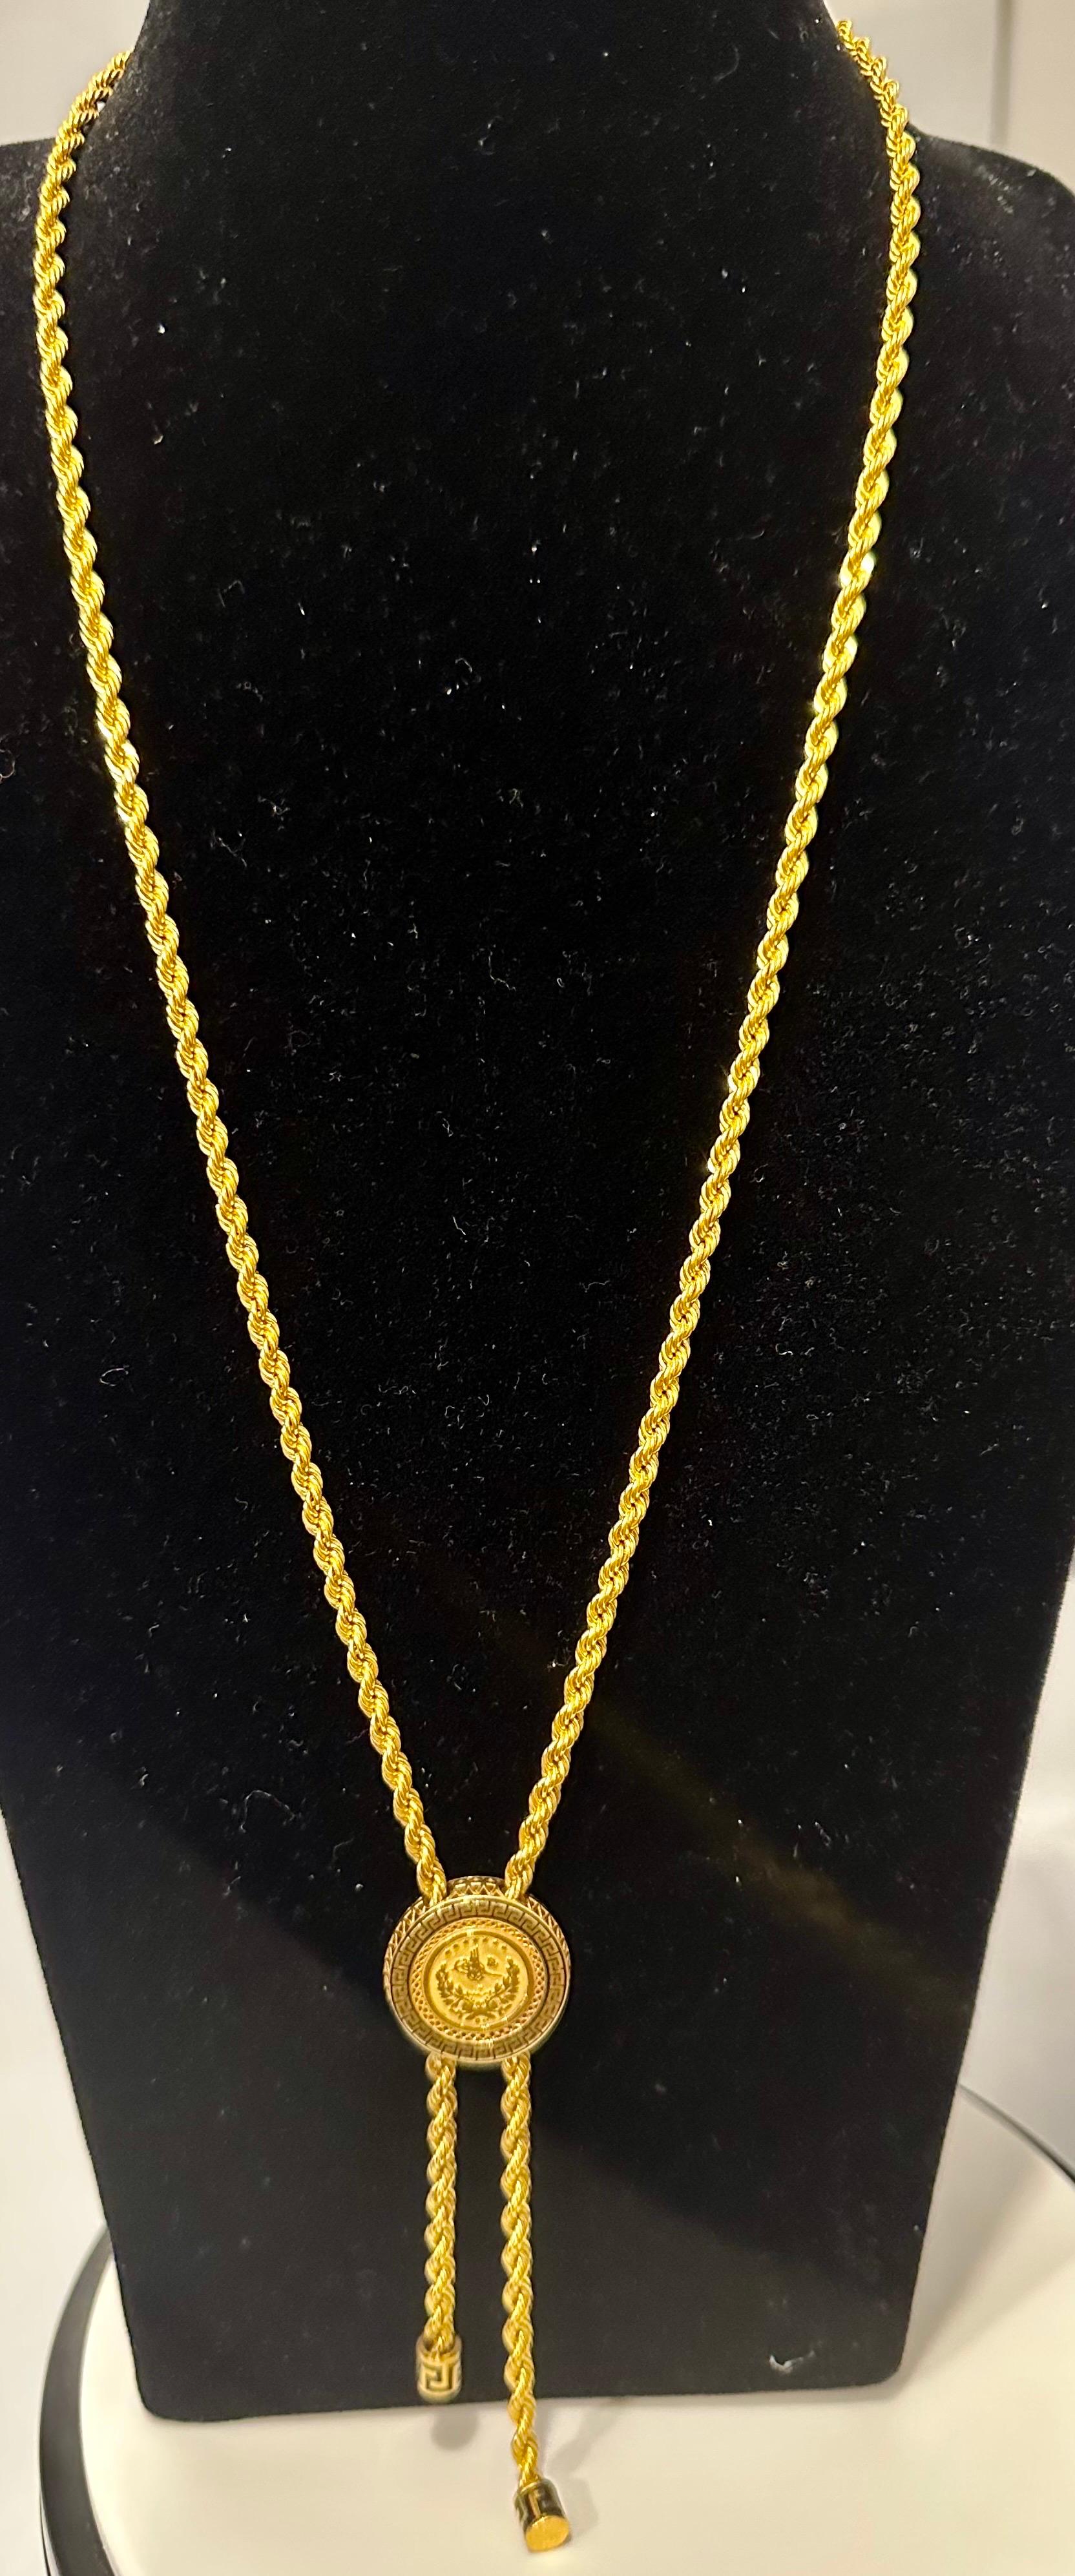 21 Karat Yellow Gold Coin Vintage Necklace with Hanging 7